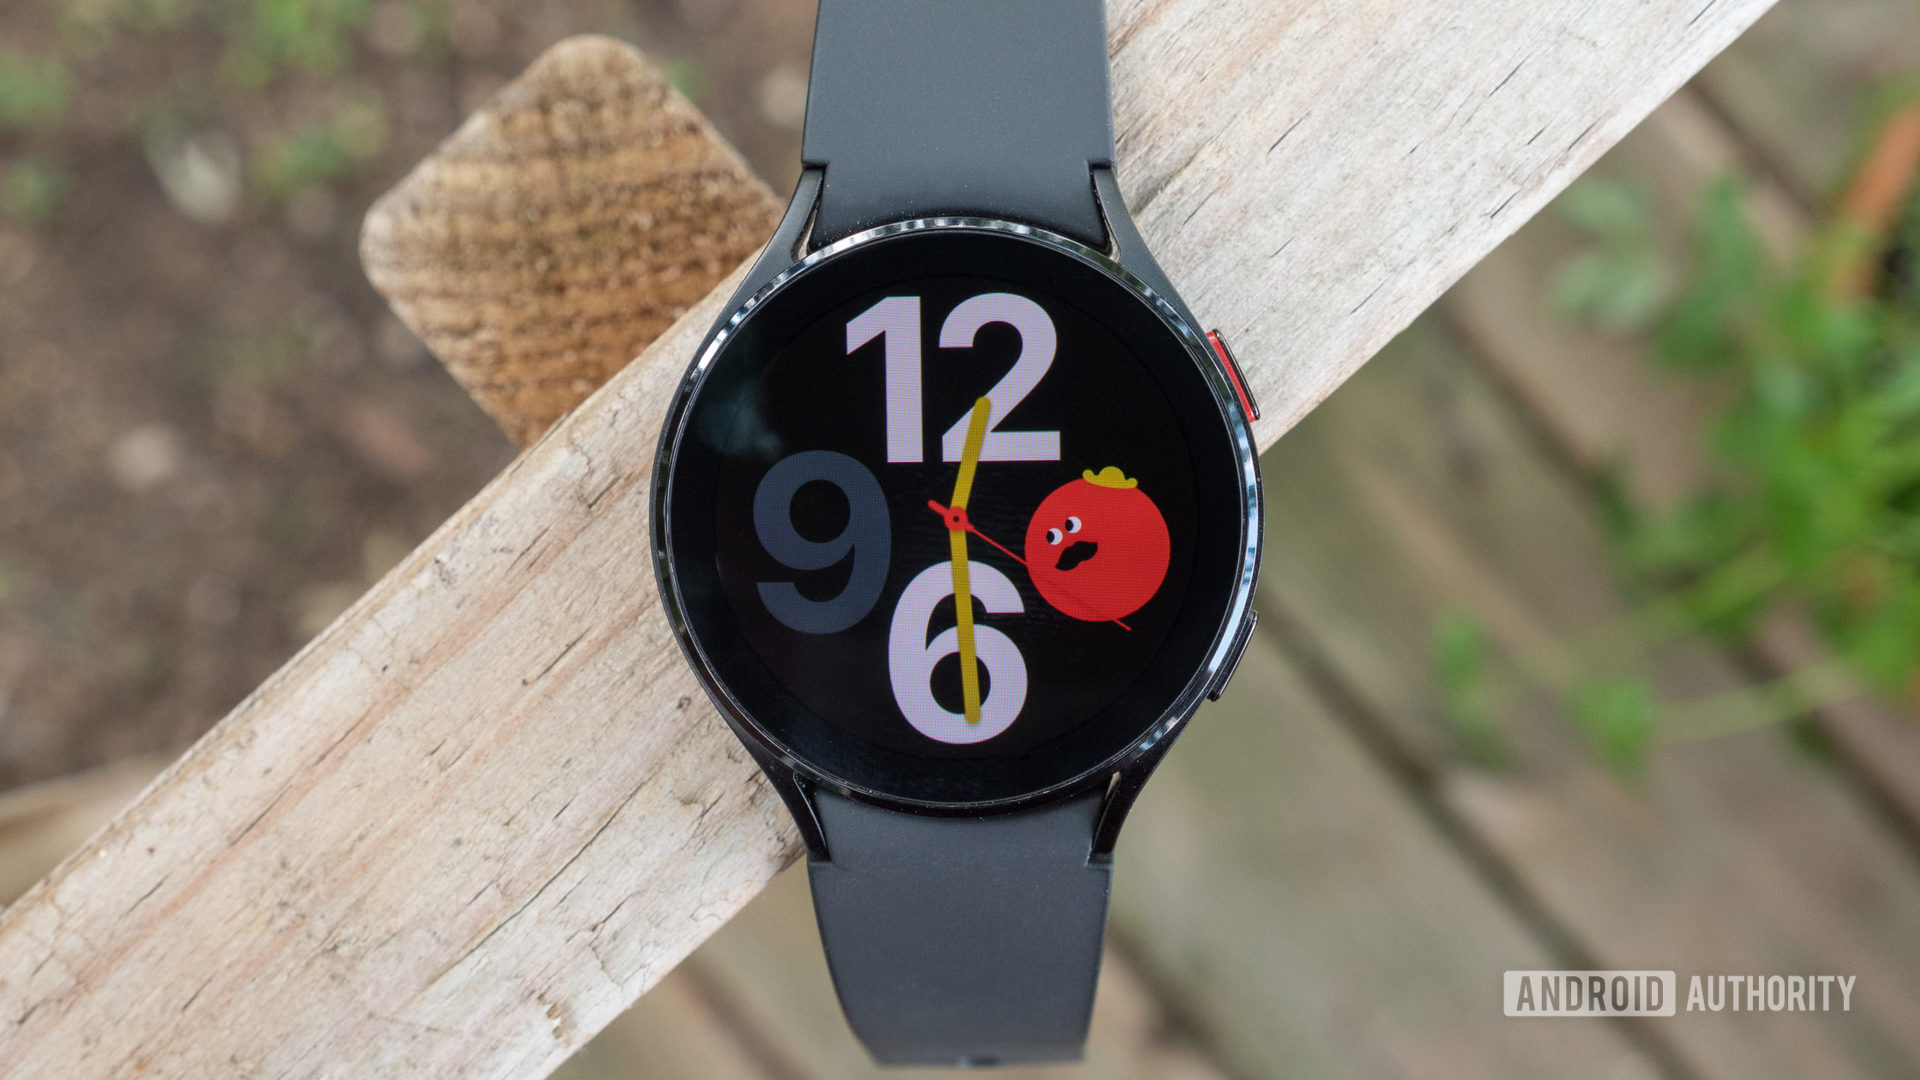 The Samsung Galaxy Watch 4 on a fence showing the watch face.